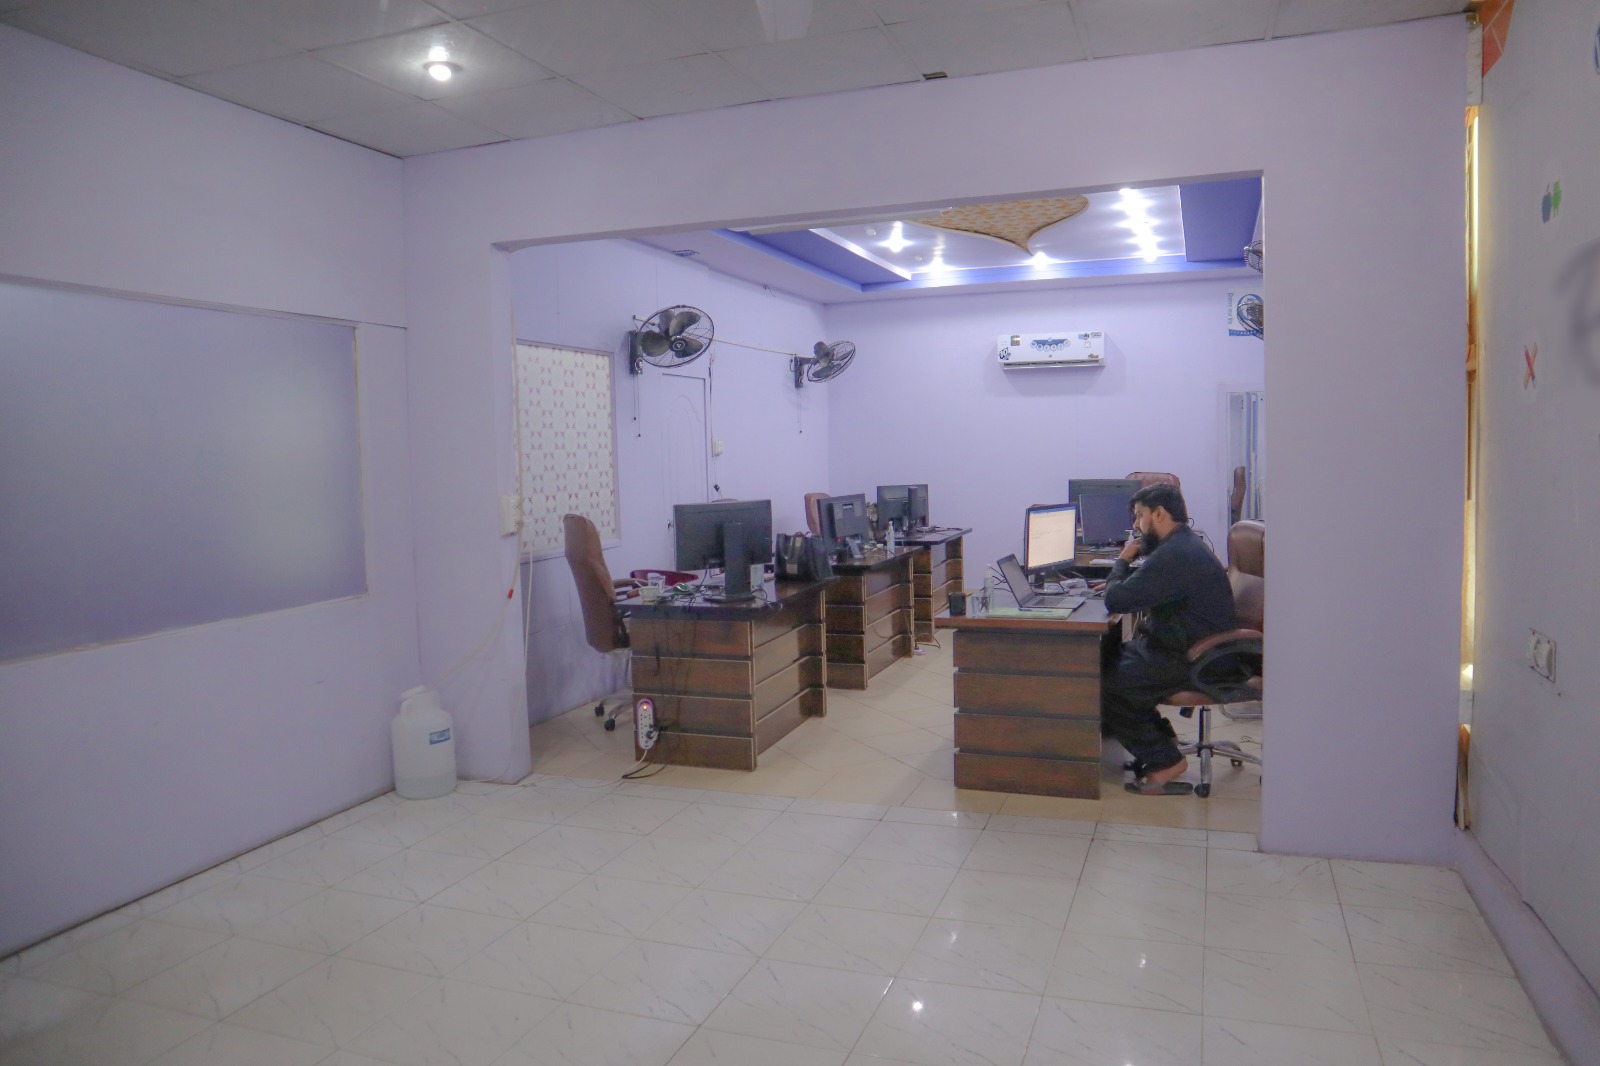 1200 Sq.ft Office For Rent in Faisalabad at Jaranwala Road.